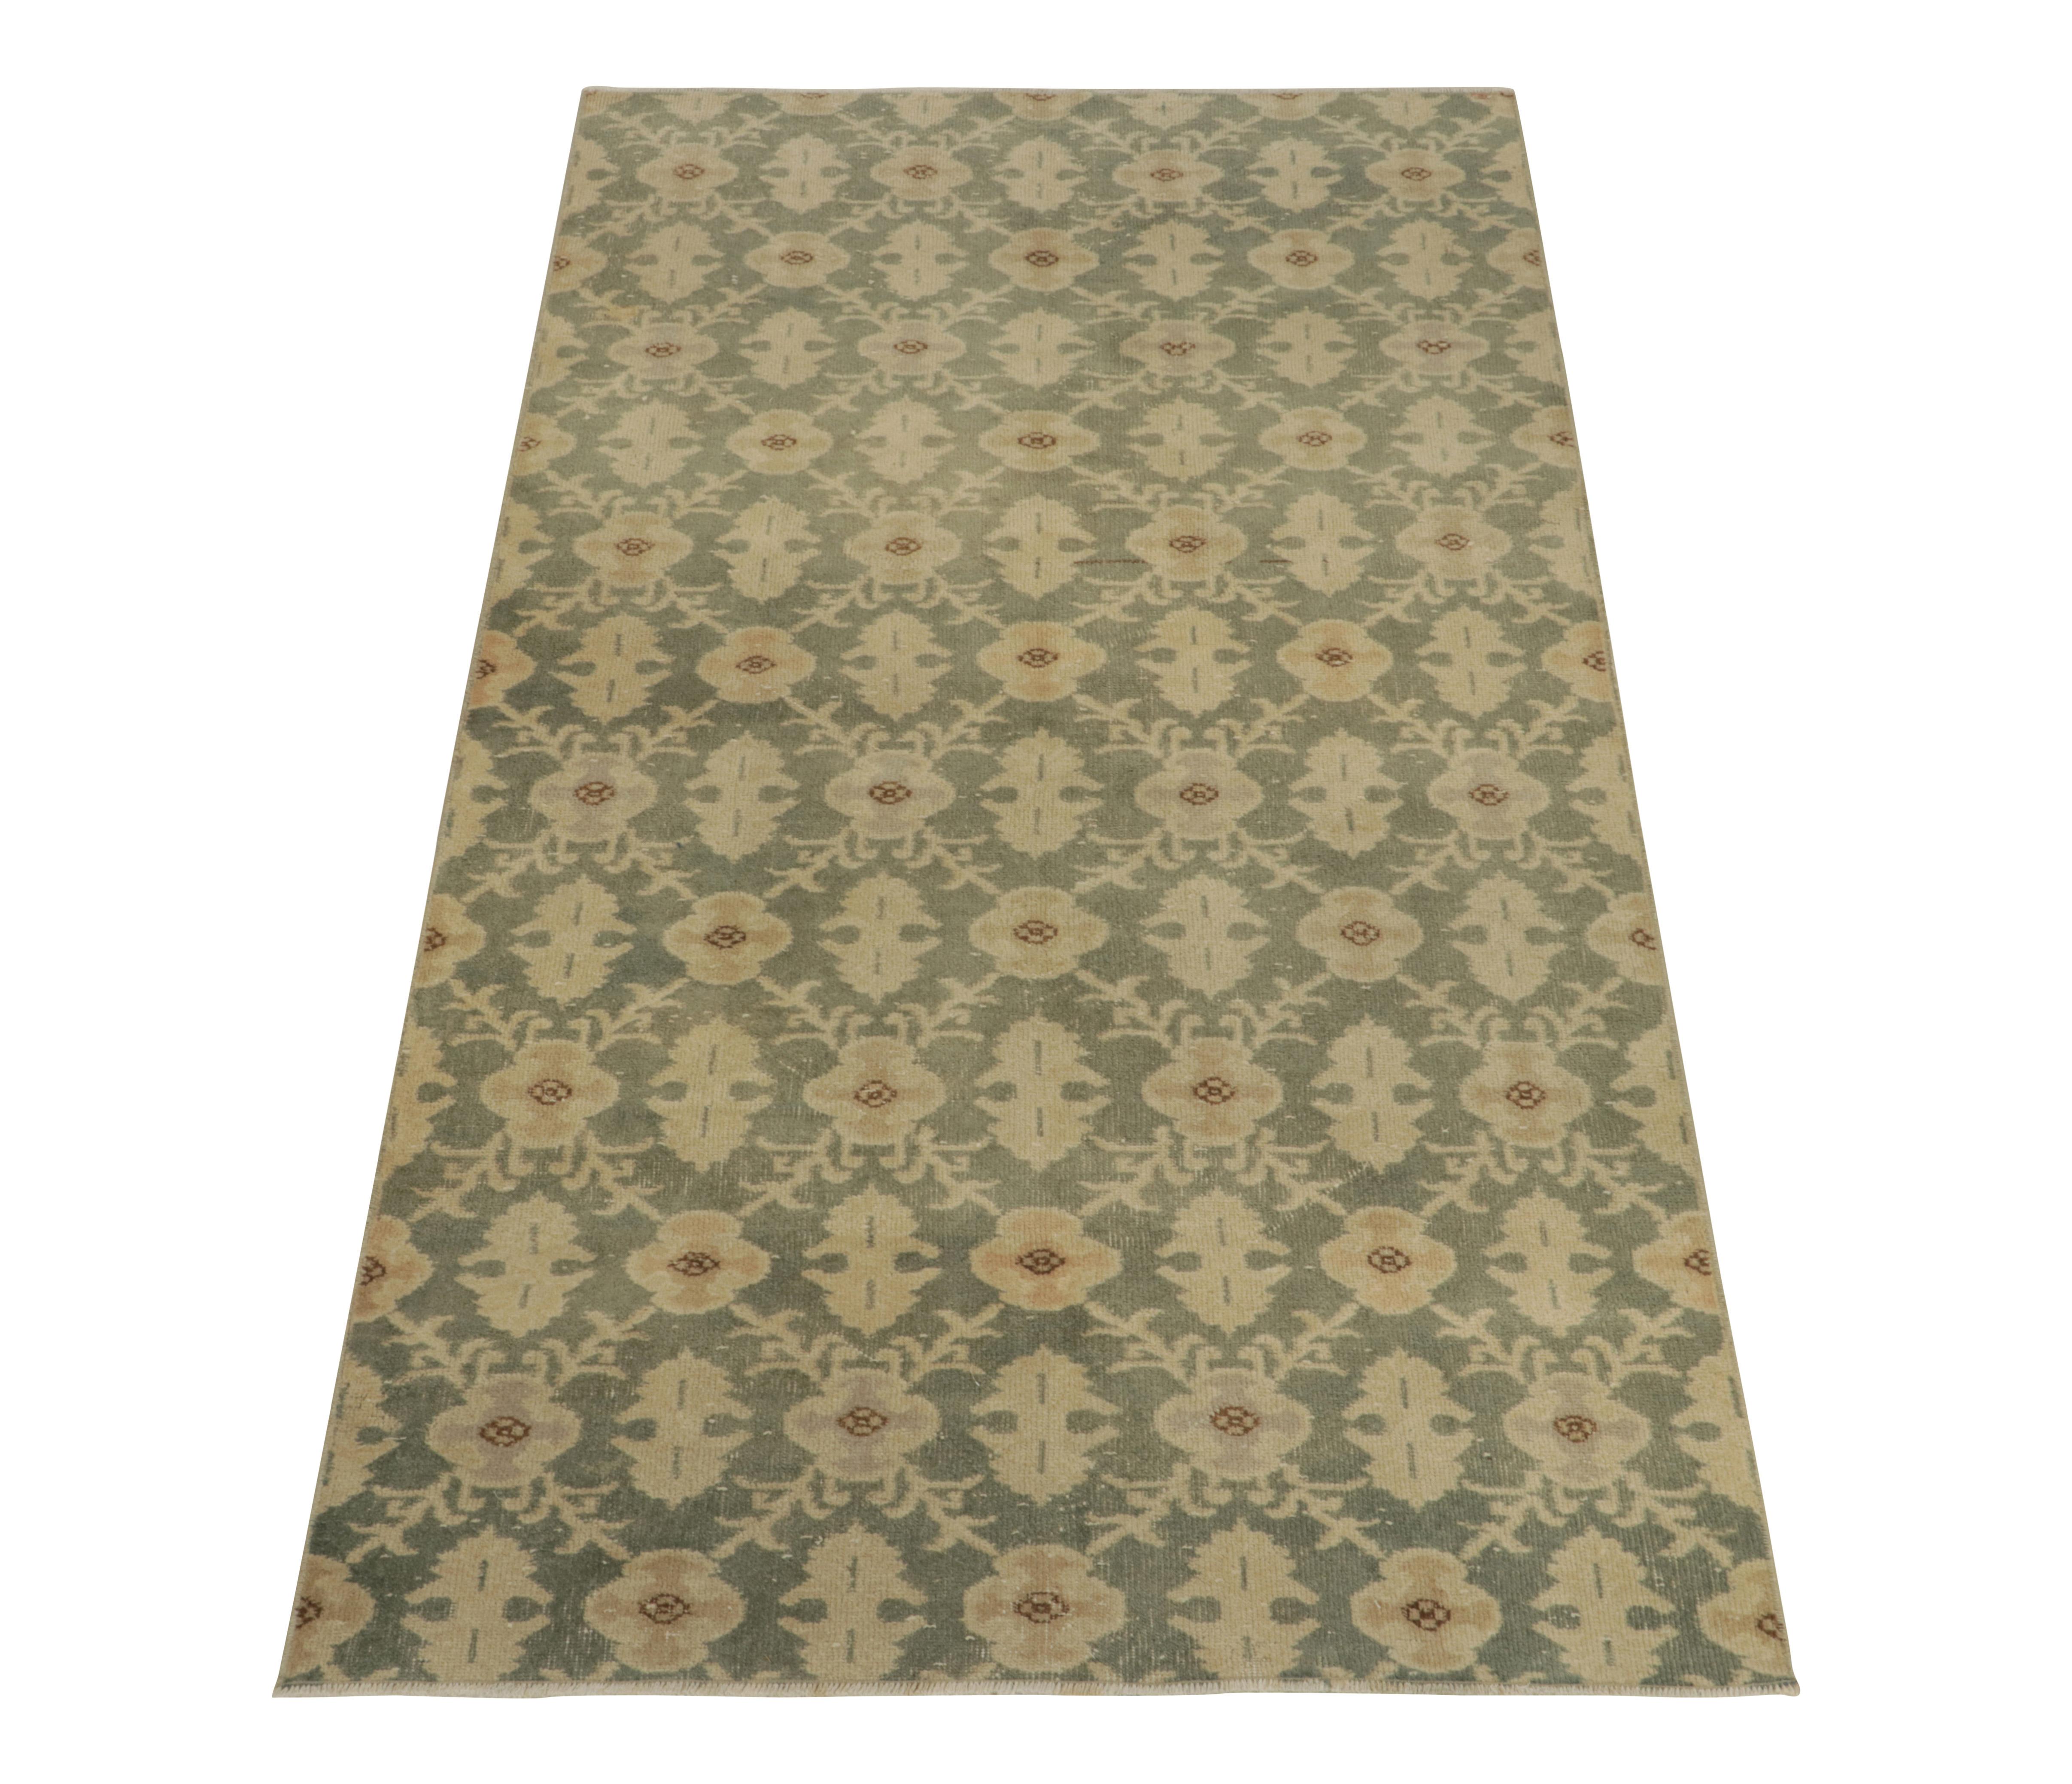 Hand-knotted in low wool pile, a 4x8 vintage rug in distressed style from the works of a revered Turkish atelier. 

Originating from Turkey circa 1960-1970, the rug transmutes art deco & nouveau sensibilities into a more European style sketch